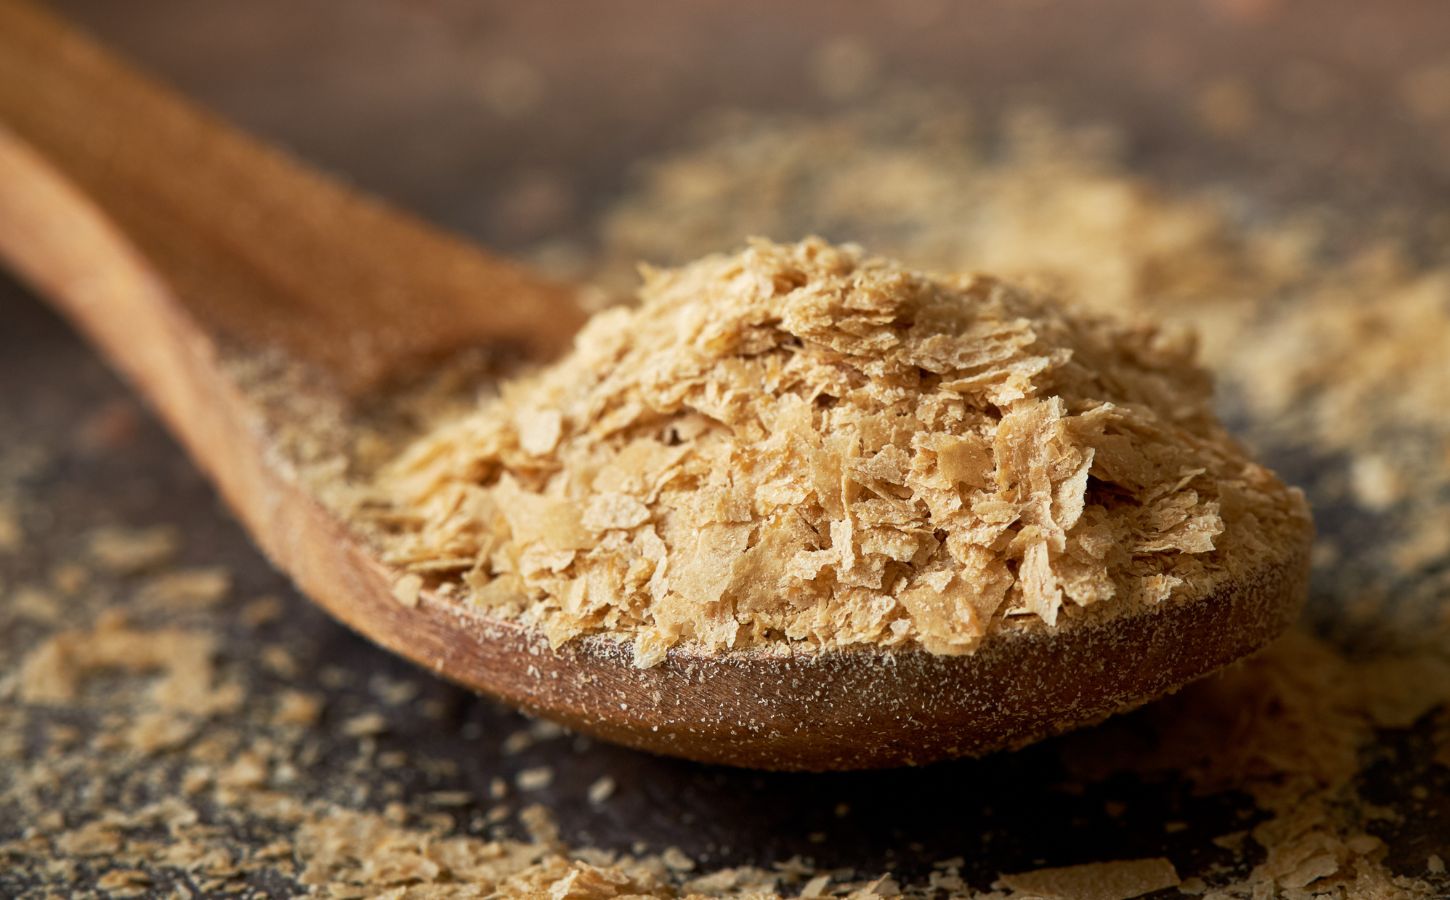 A wooden spoon full of nutritional yeast, a complete vegan protein source